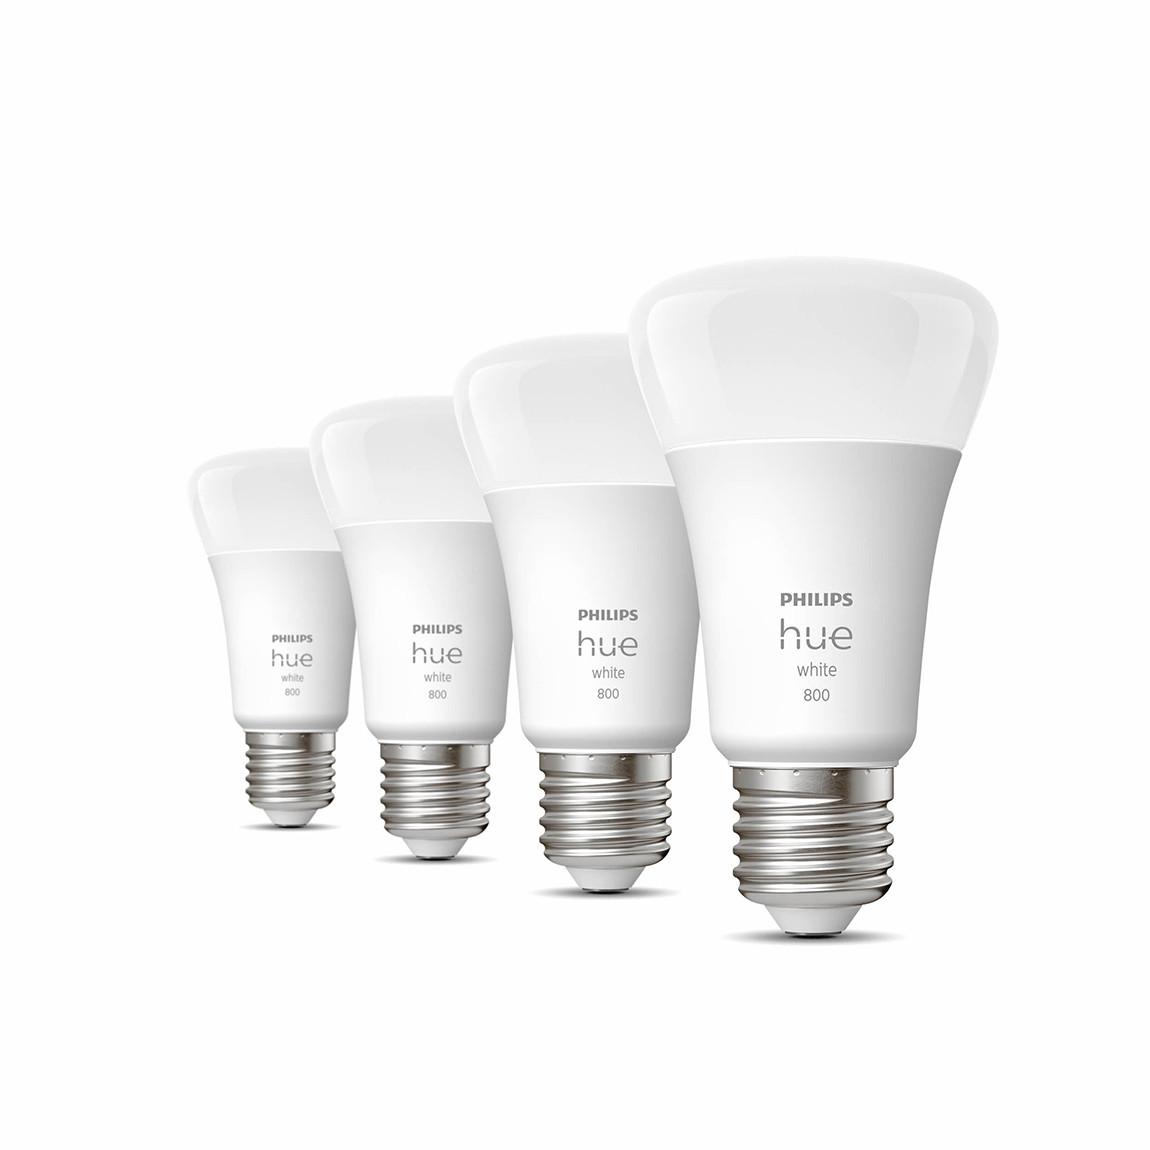 Philips Hue White E27 Viererpack 800lm 60W aus